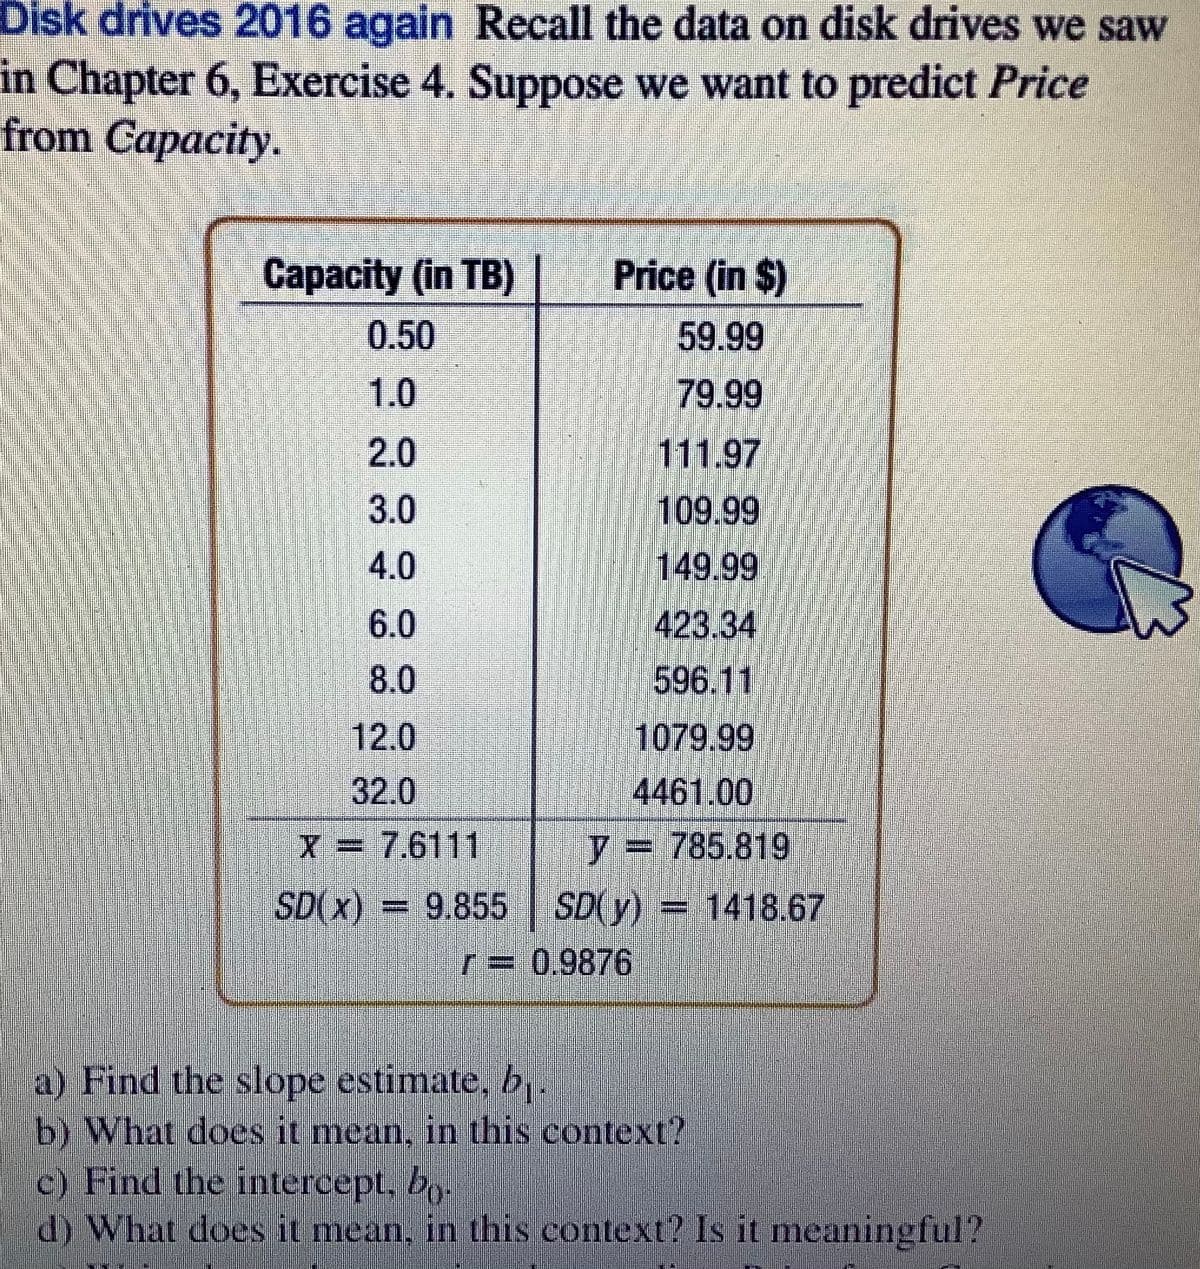 Disk drives 2016 again Recall the data on disk drives we saw
in Chapter 6, Exercise 4. Suppose we want to predict Price
from Capacity.
Capacity (in TB)
Price (in $)
0.50
59.99
1.0
79.99
2.0
111.97
3.0
109.99
149.99
423.34
596.11
1079.99
4461.00
4.0
6.0
8.0
12.0
32.0
X = 7.6111
y = 785.819
SD(x) =
SD(y) = 1418.67
r=D 0.9876
a) Find the slope estimate, b.
b) What does it mean, in this context?
c) Find the intercept. bo.
d) What does it mean, in this context? Is it meaningful?
